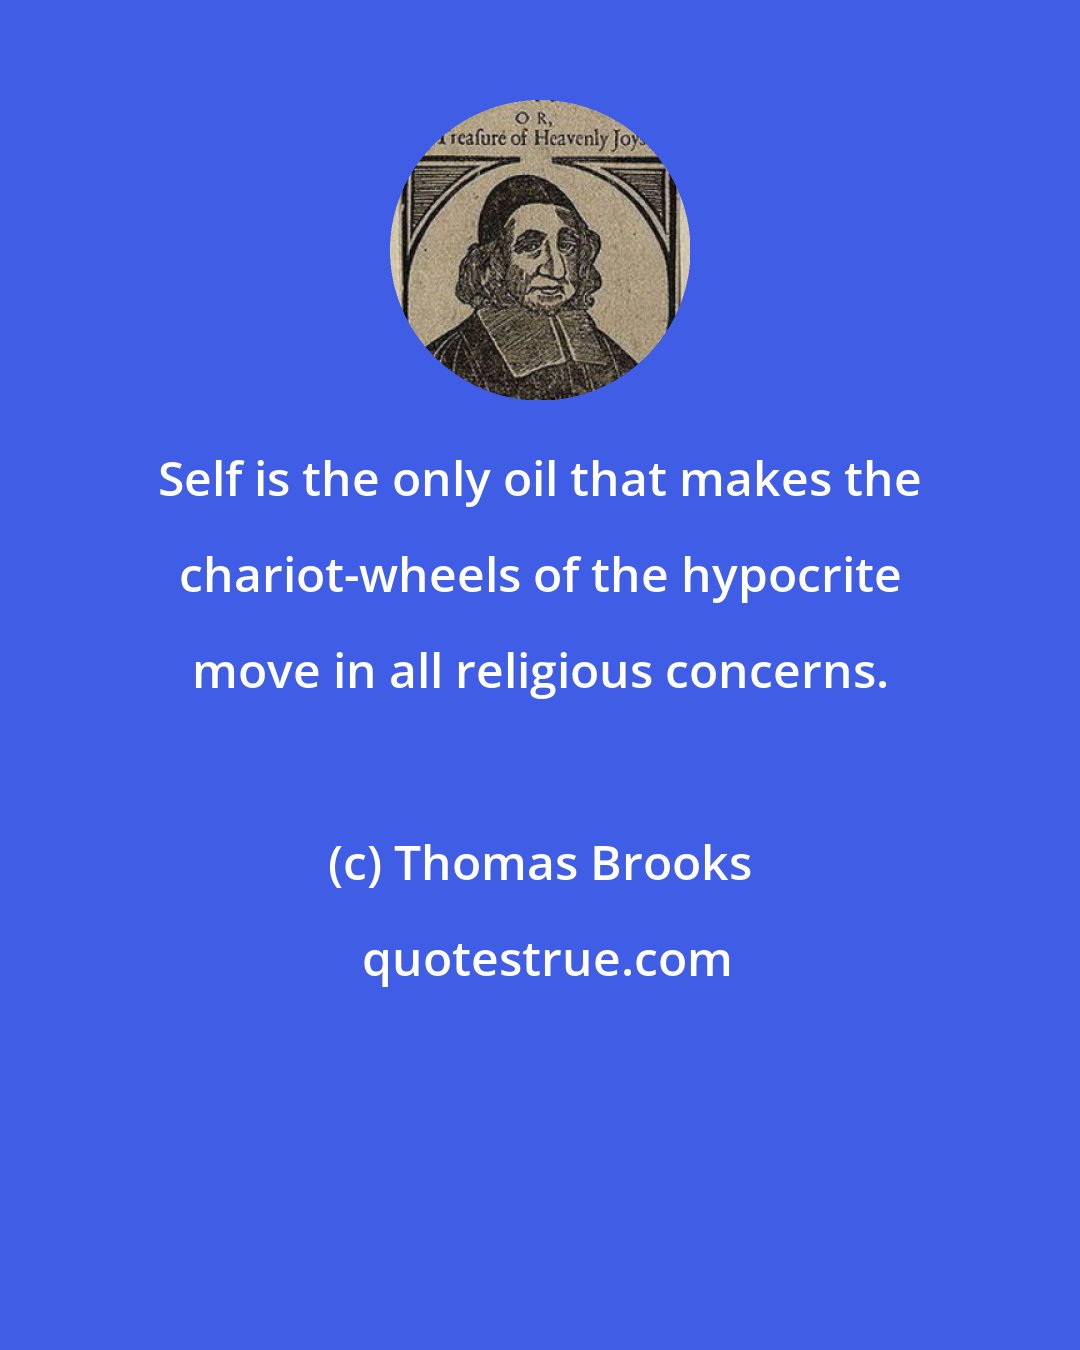 Thomas Brooks: Self is the only oil that makes the chariot-wheels of the hypocrite move in all religious concerns.